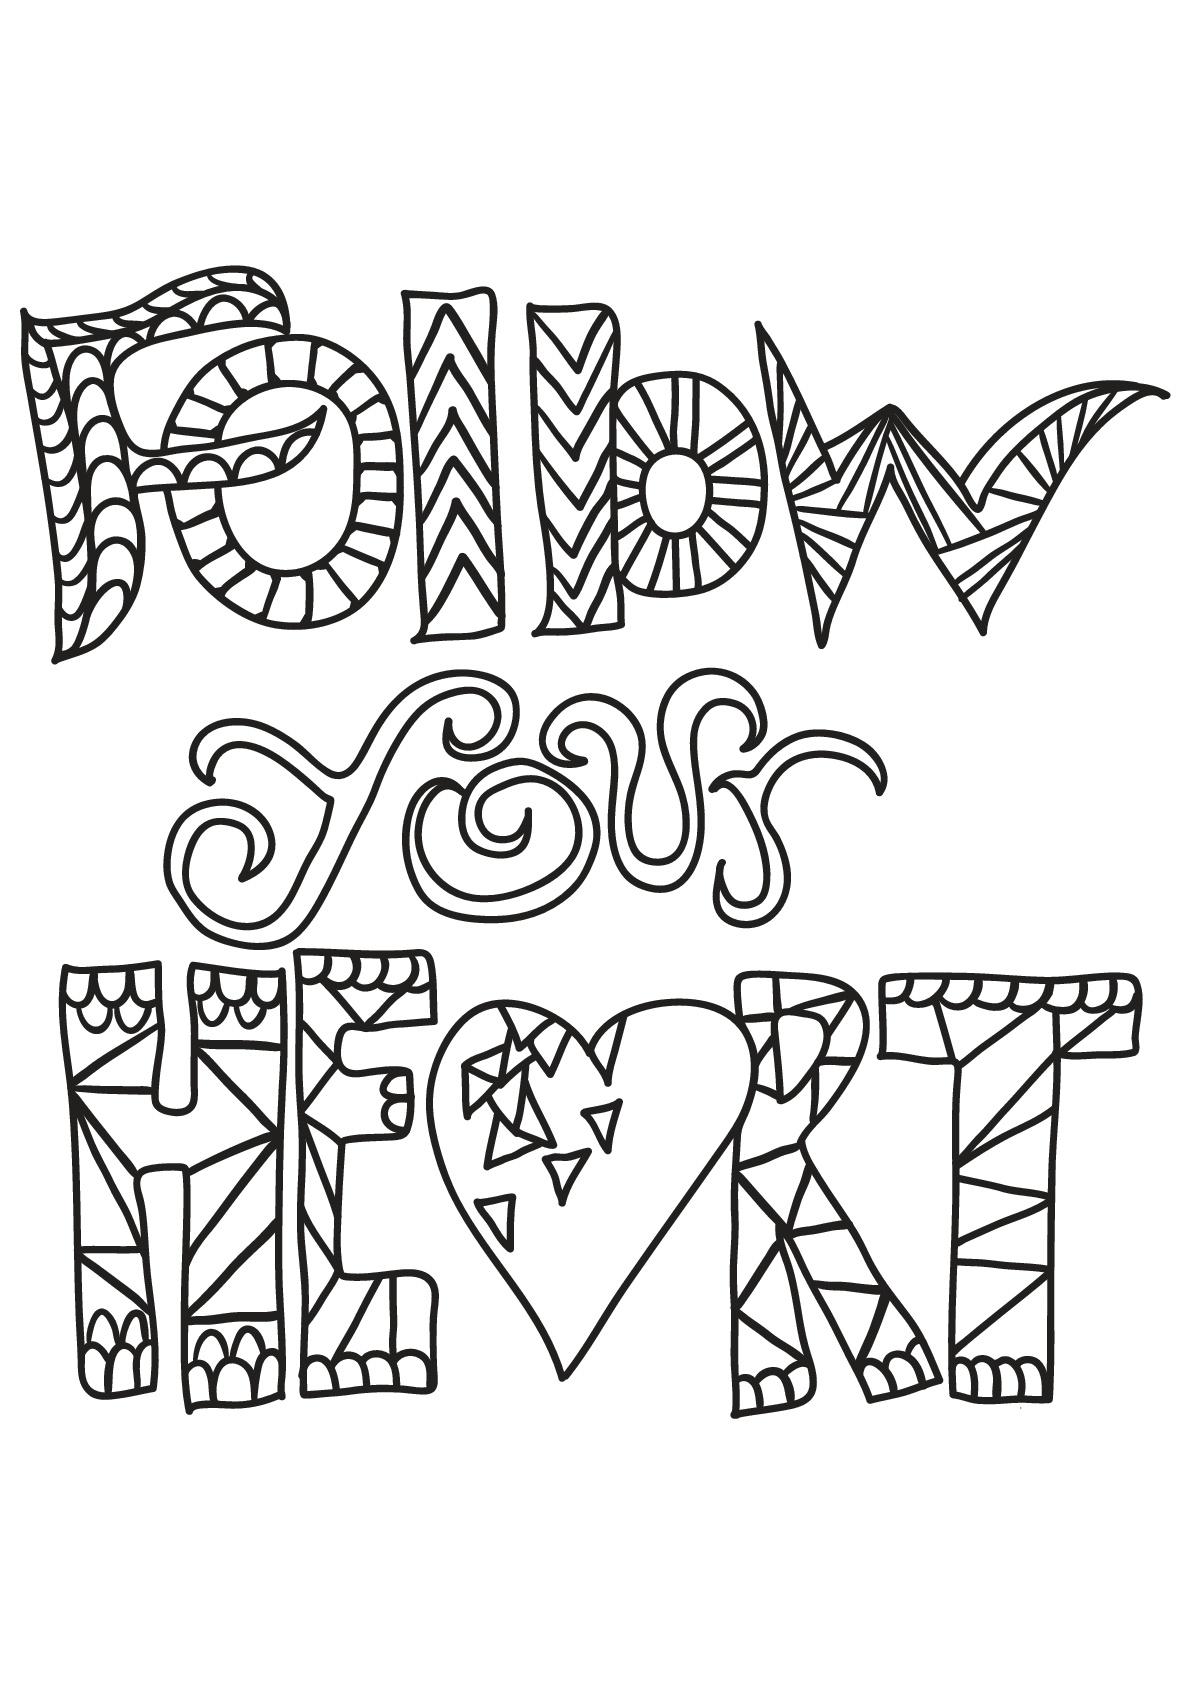 10 Of the Best Ideas for Printable Adult Coloring Pages ...